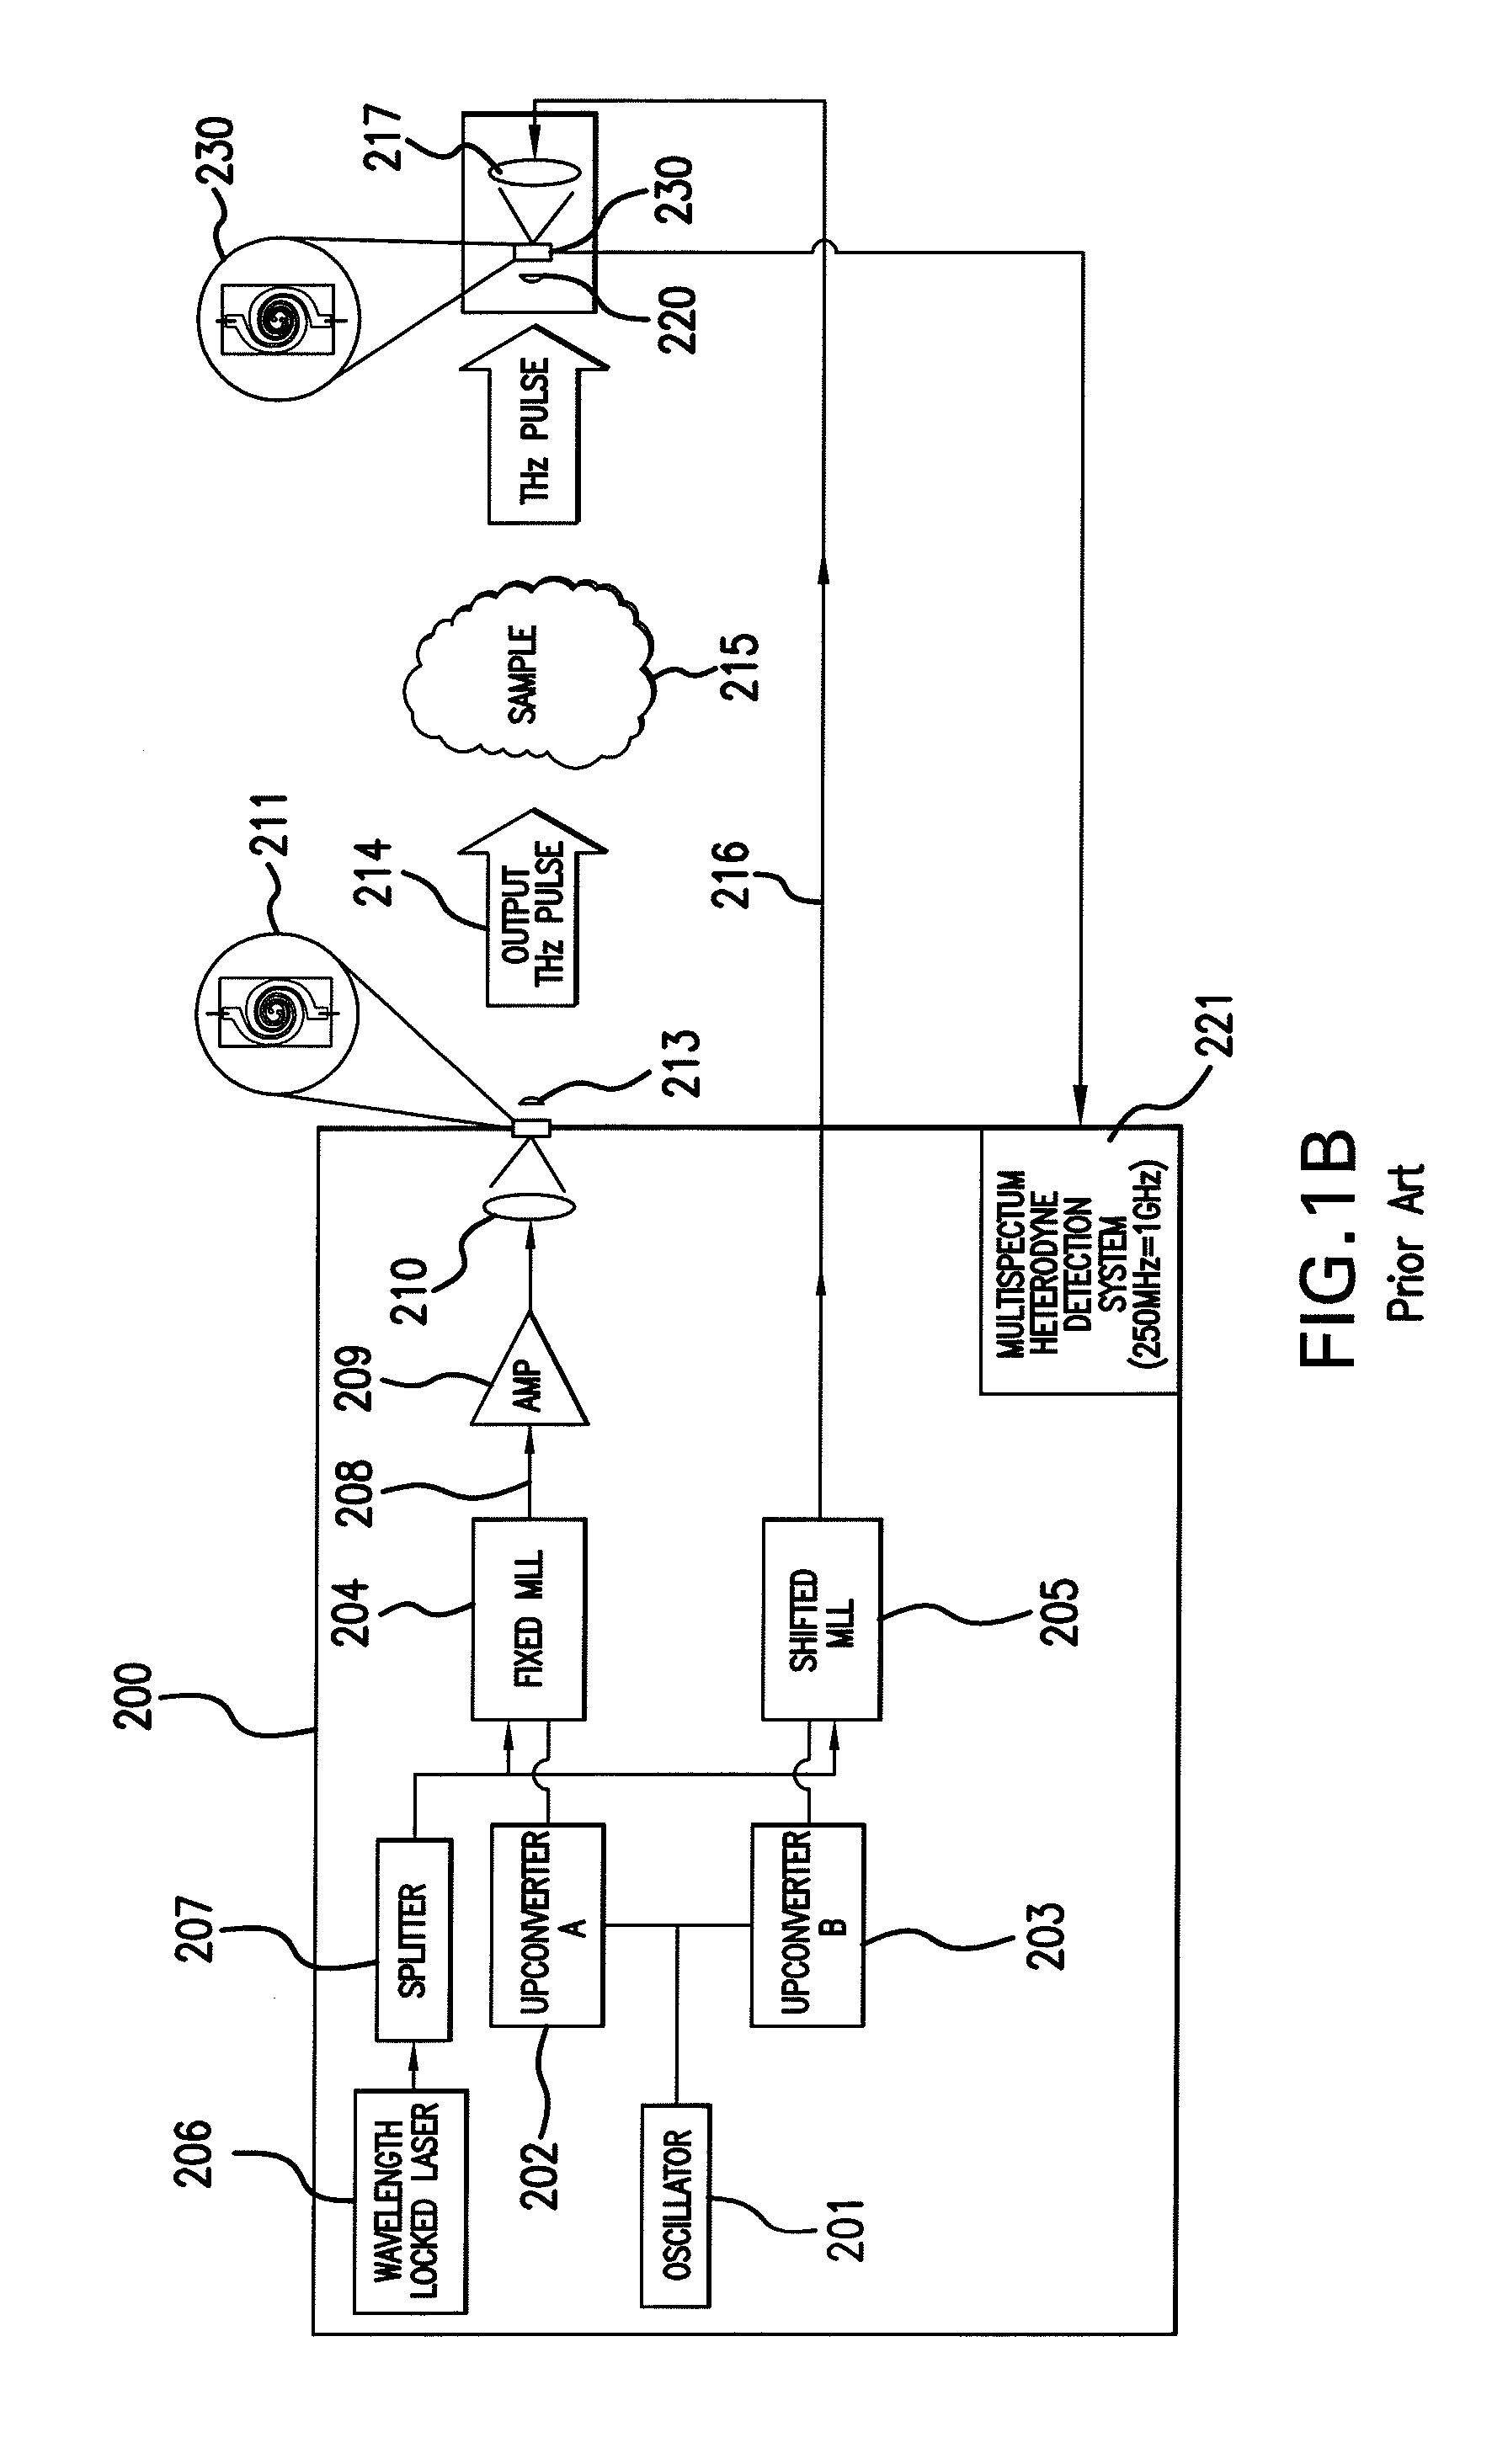 Terahertz frequency domain spectrometer with integrated dual laser module